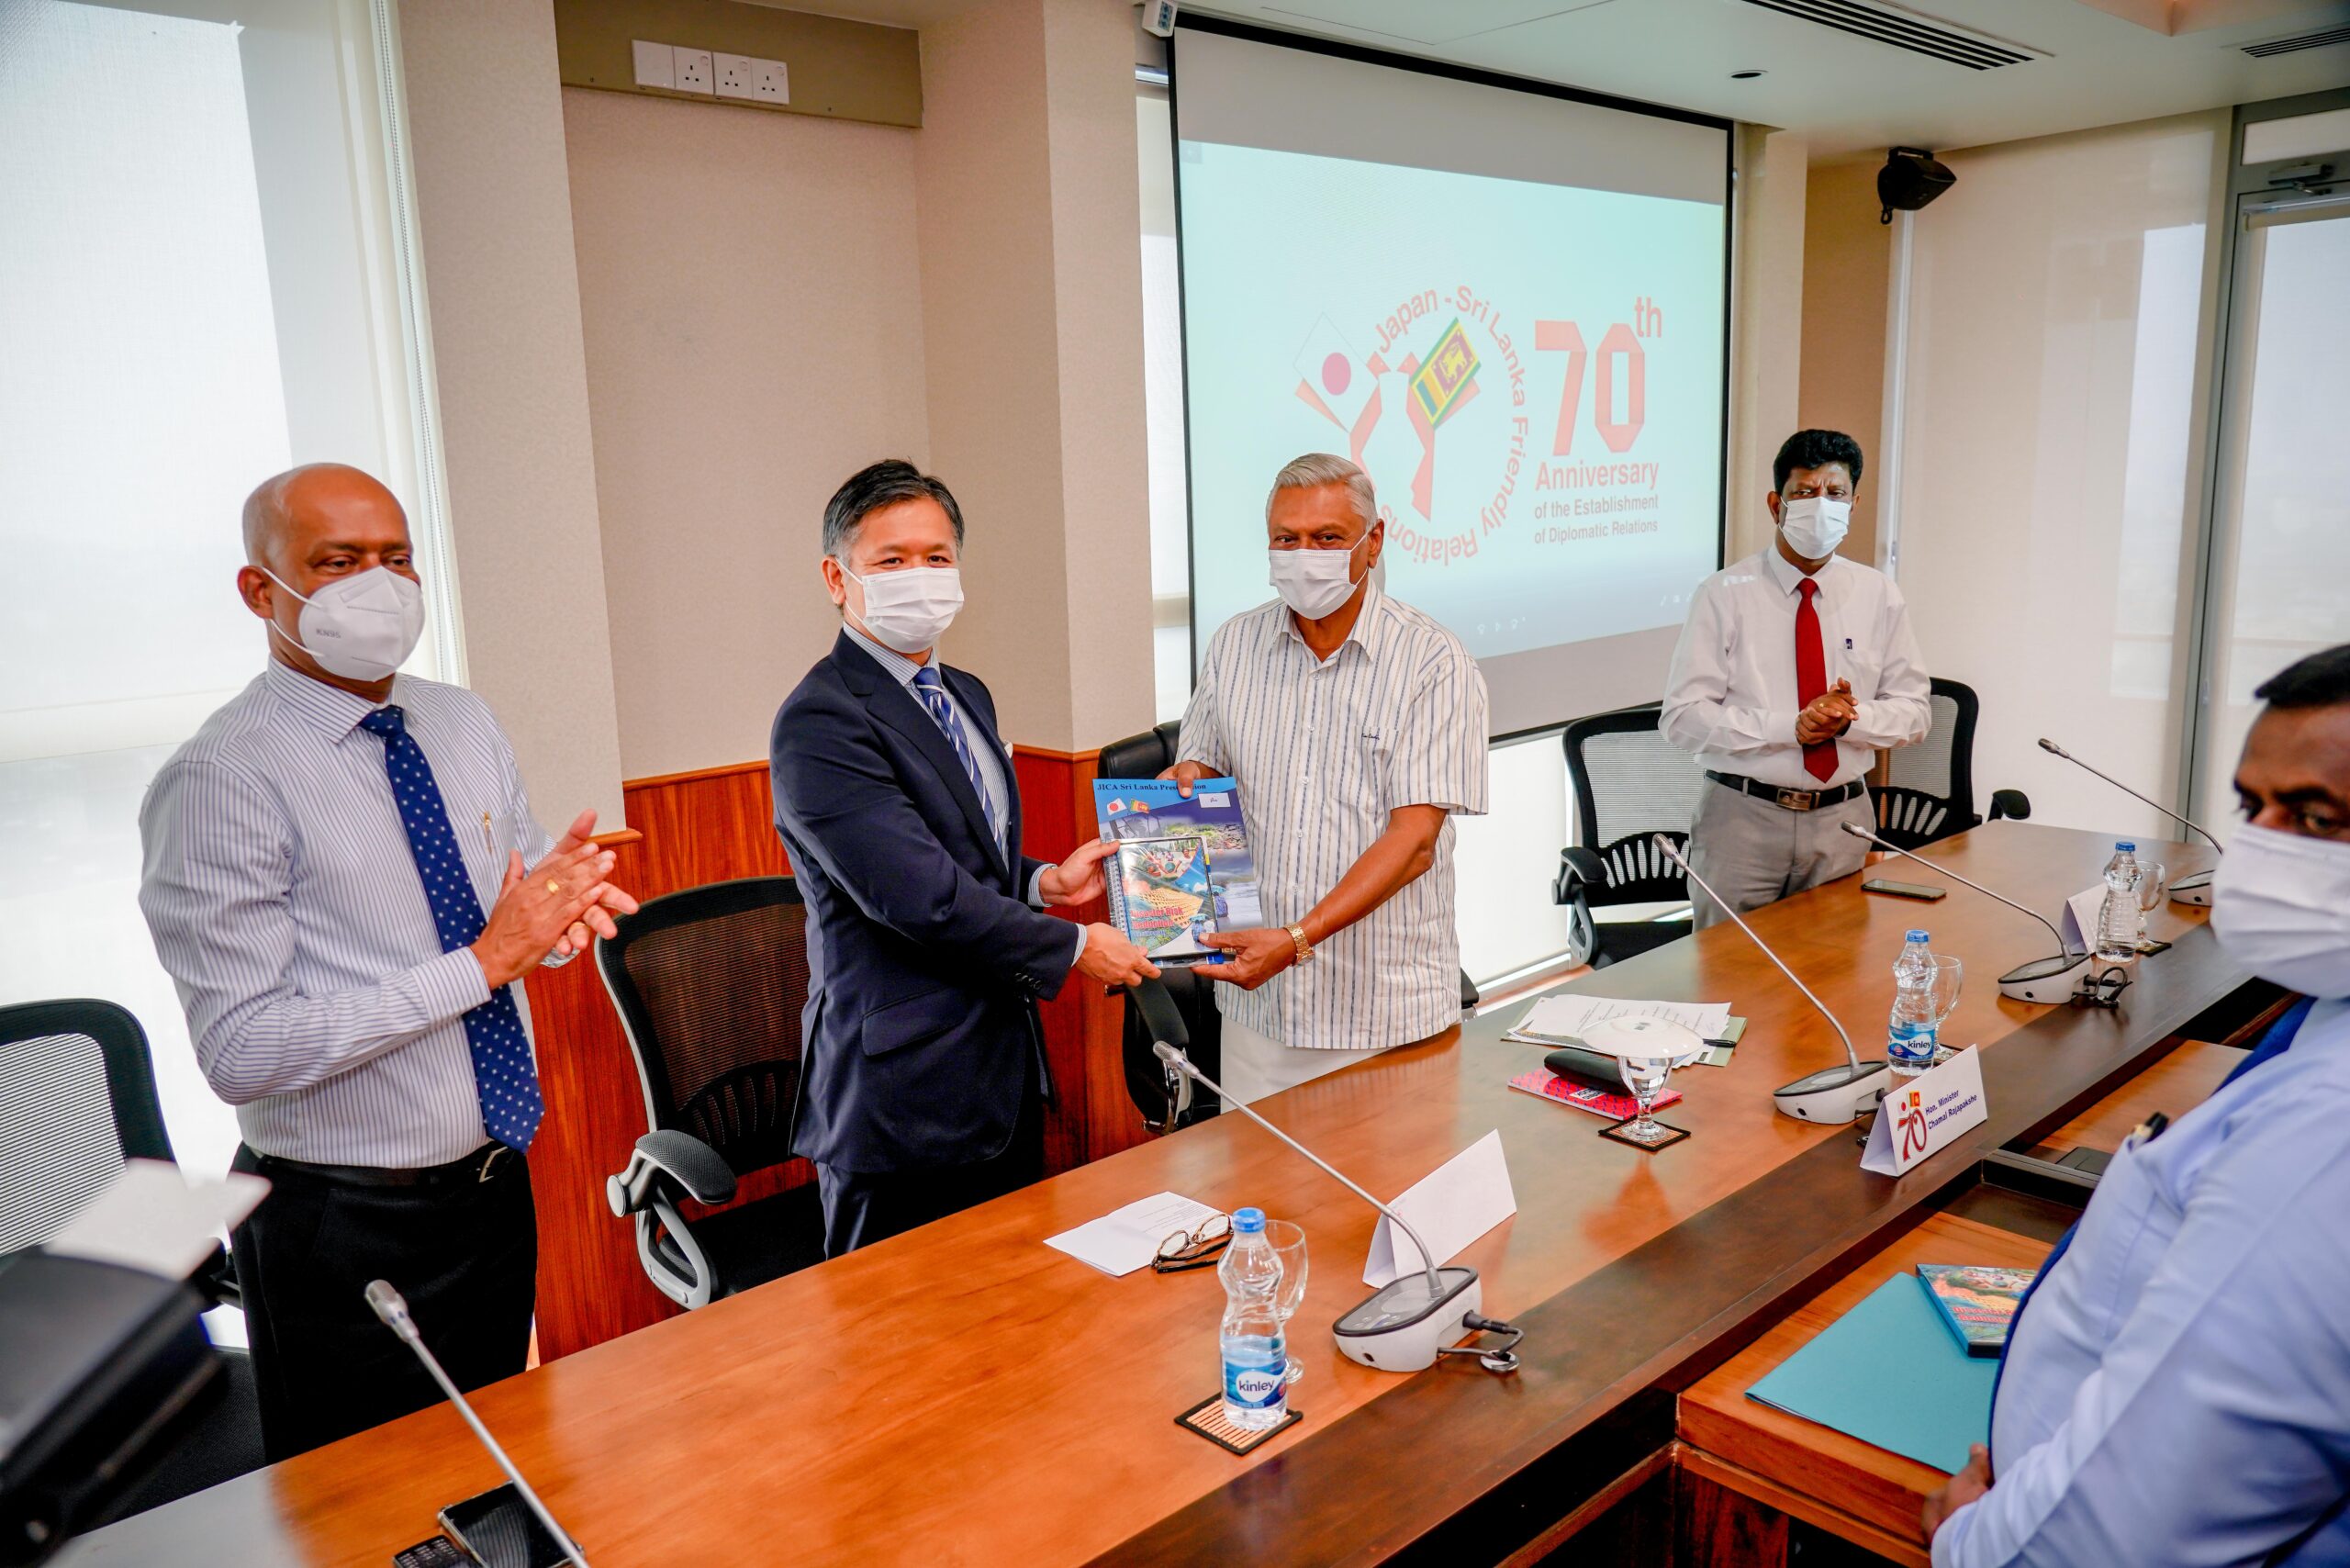 A launching ceremony of the movie on “Disaster Risk Reduction” produced by JICA Sri Lanka was held on 11 March 2022